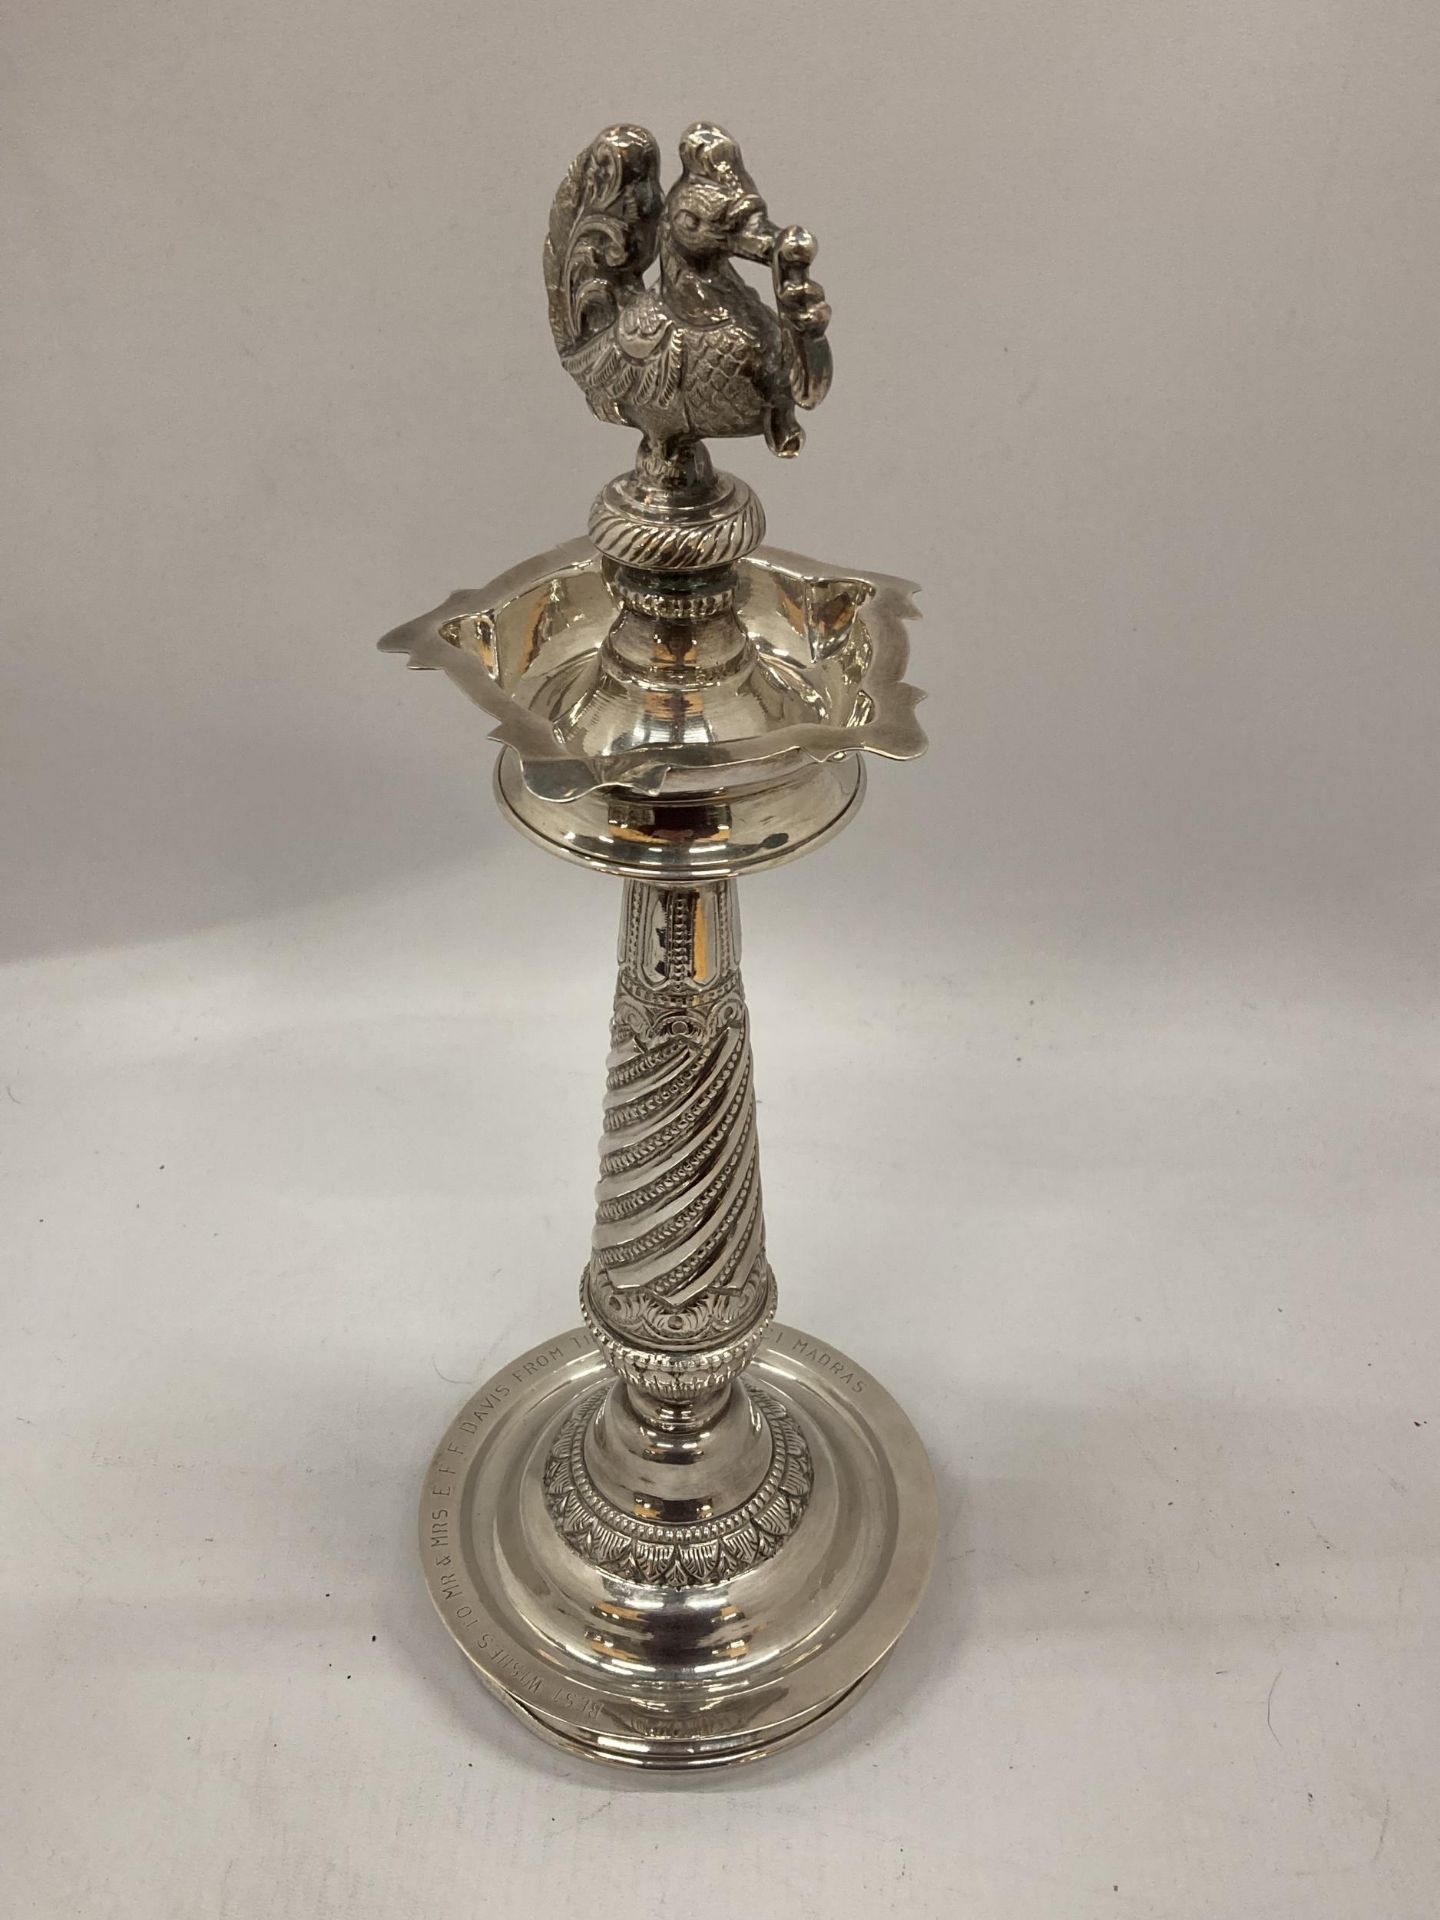 A LARGE , BELIEVED INDIAN SILVER, WHITE METAL STAND WITH BIRD DESIGN TOP, WITH PRESENTATION